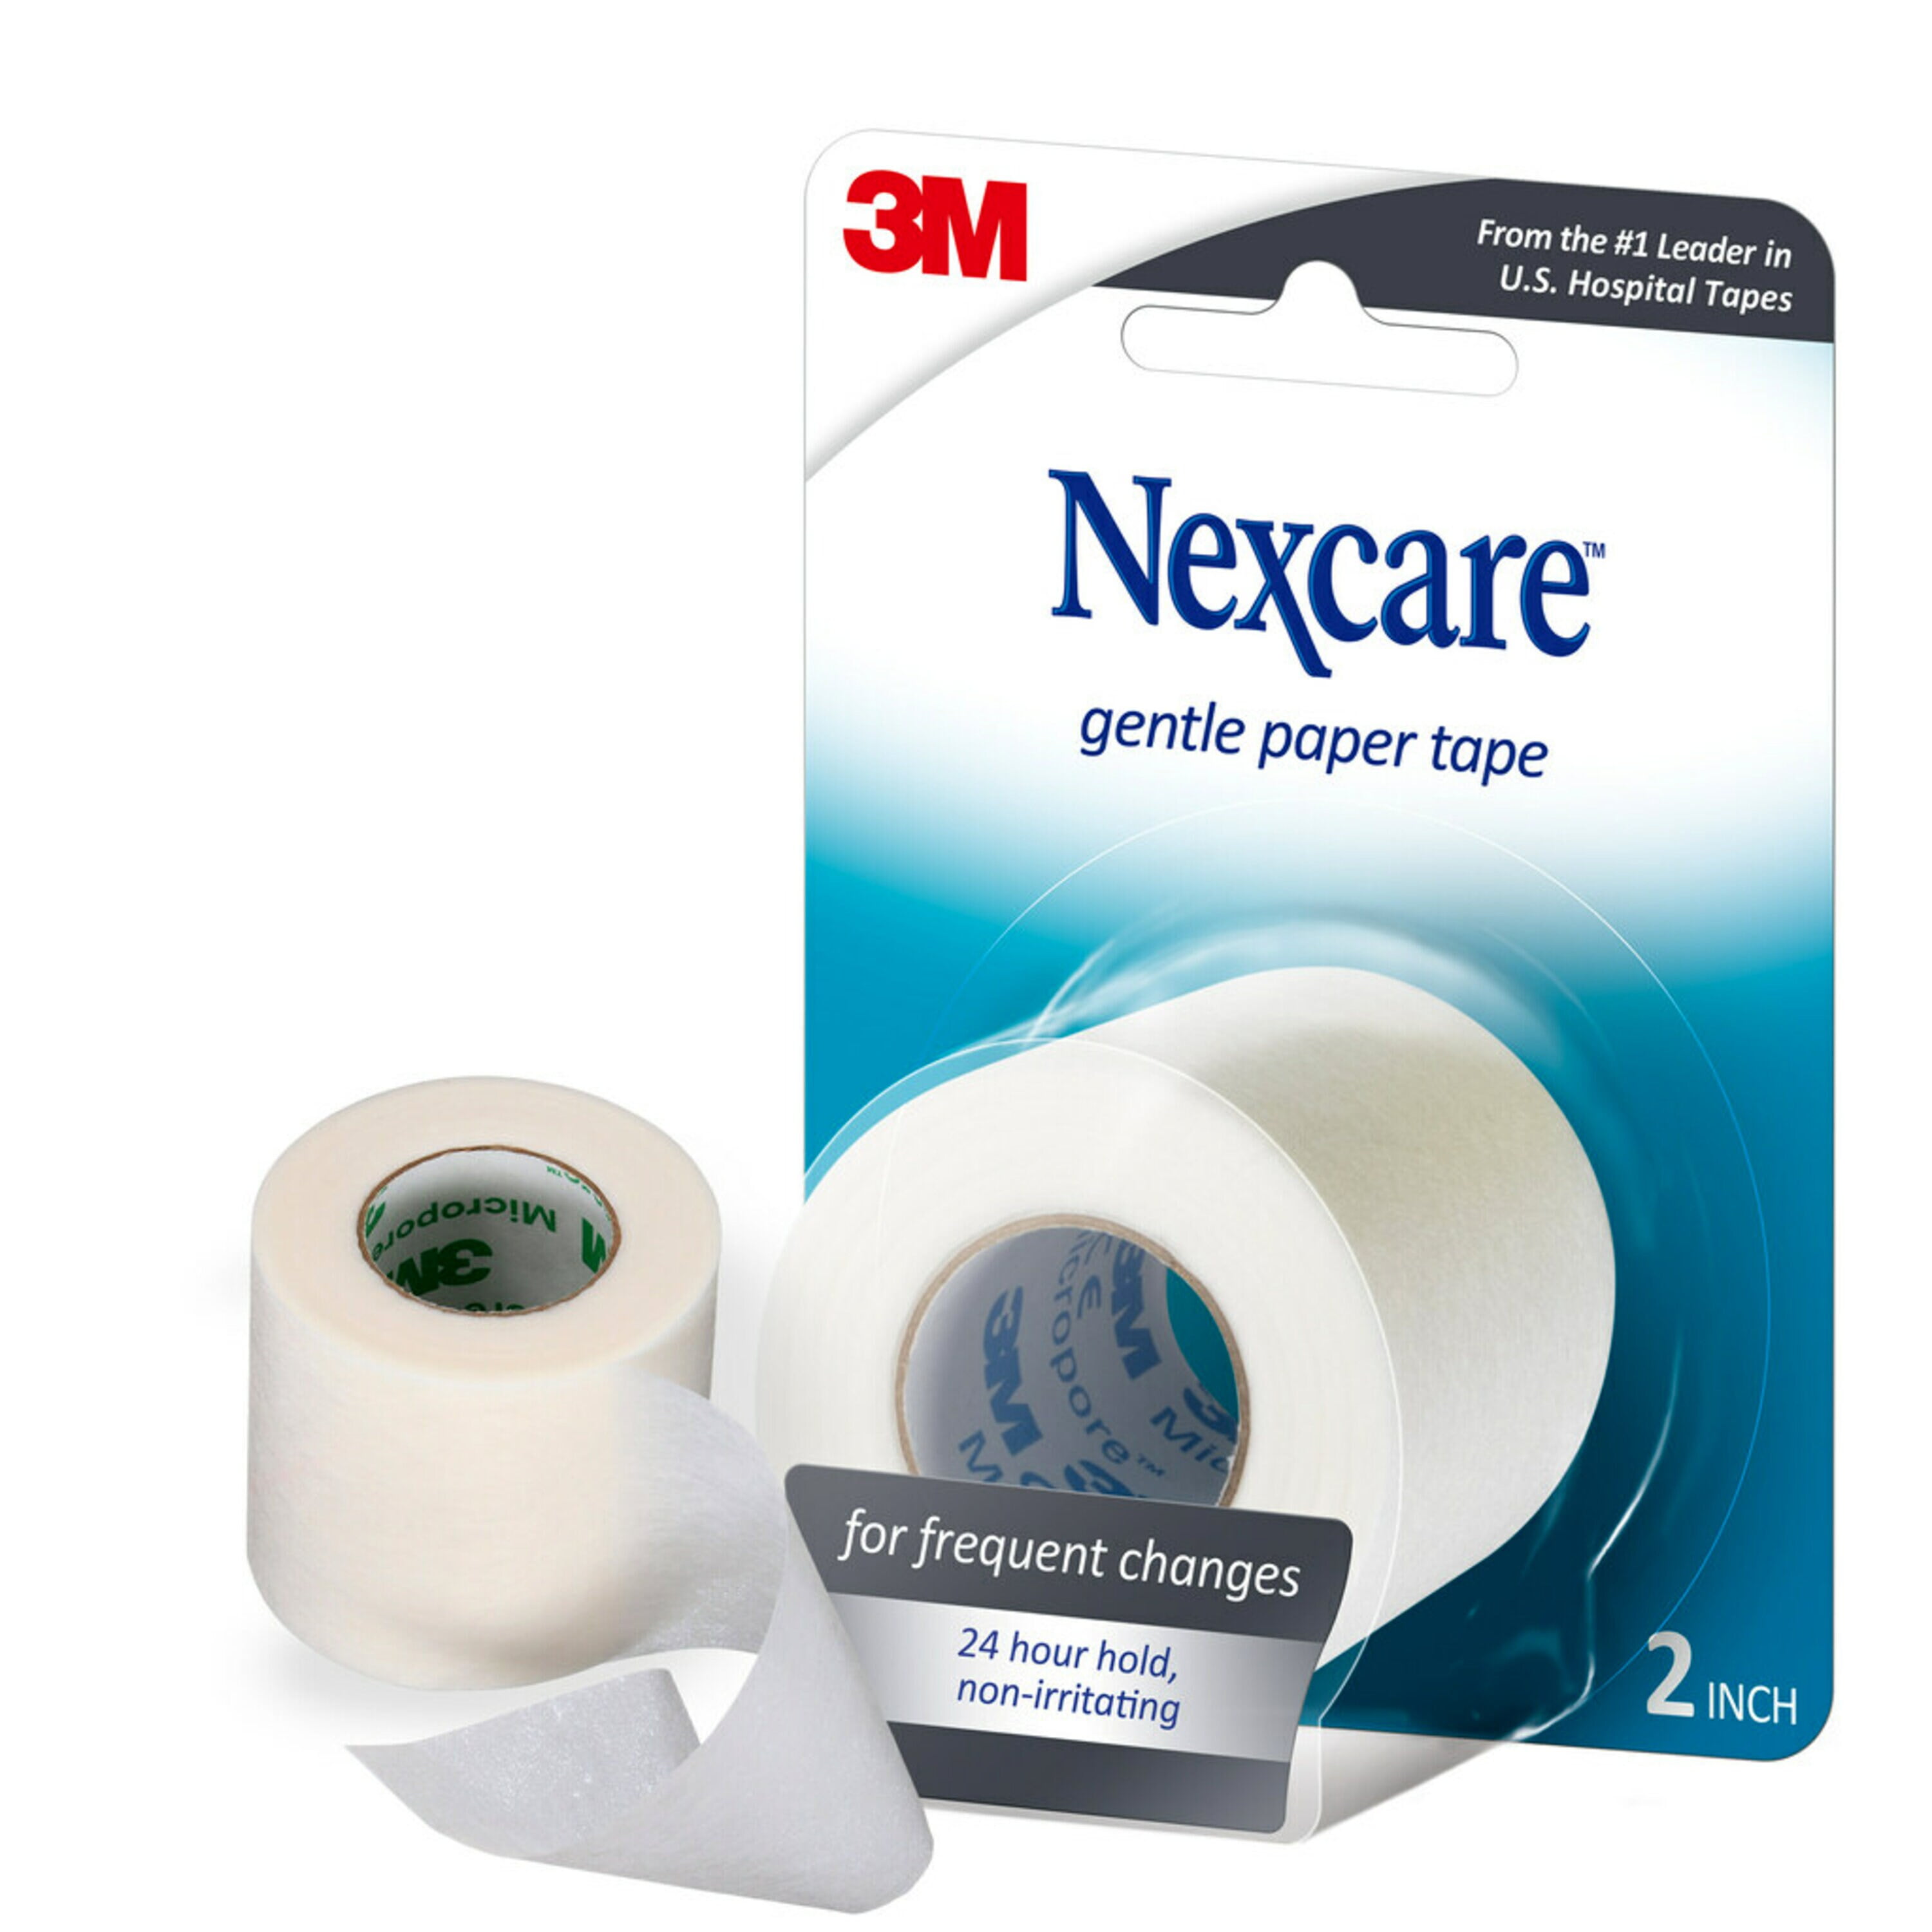 Nexcare Gentle Paper Tape - 2 In x 10 Yds, 1 Roll of Tape